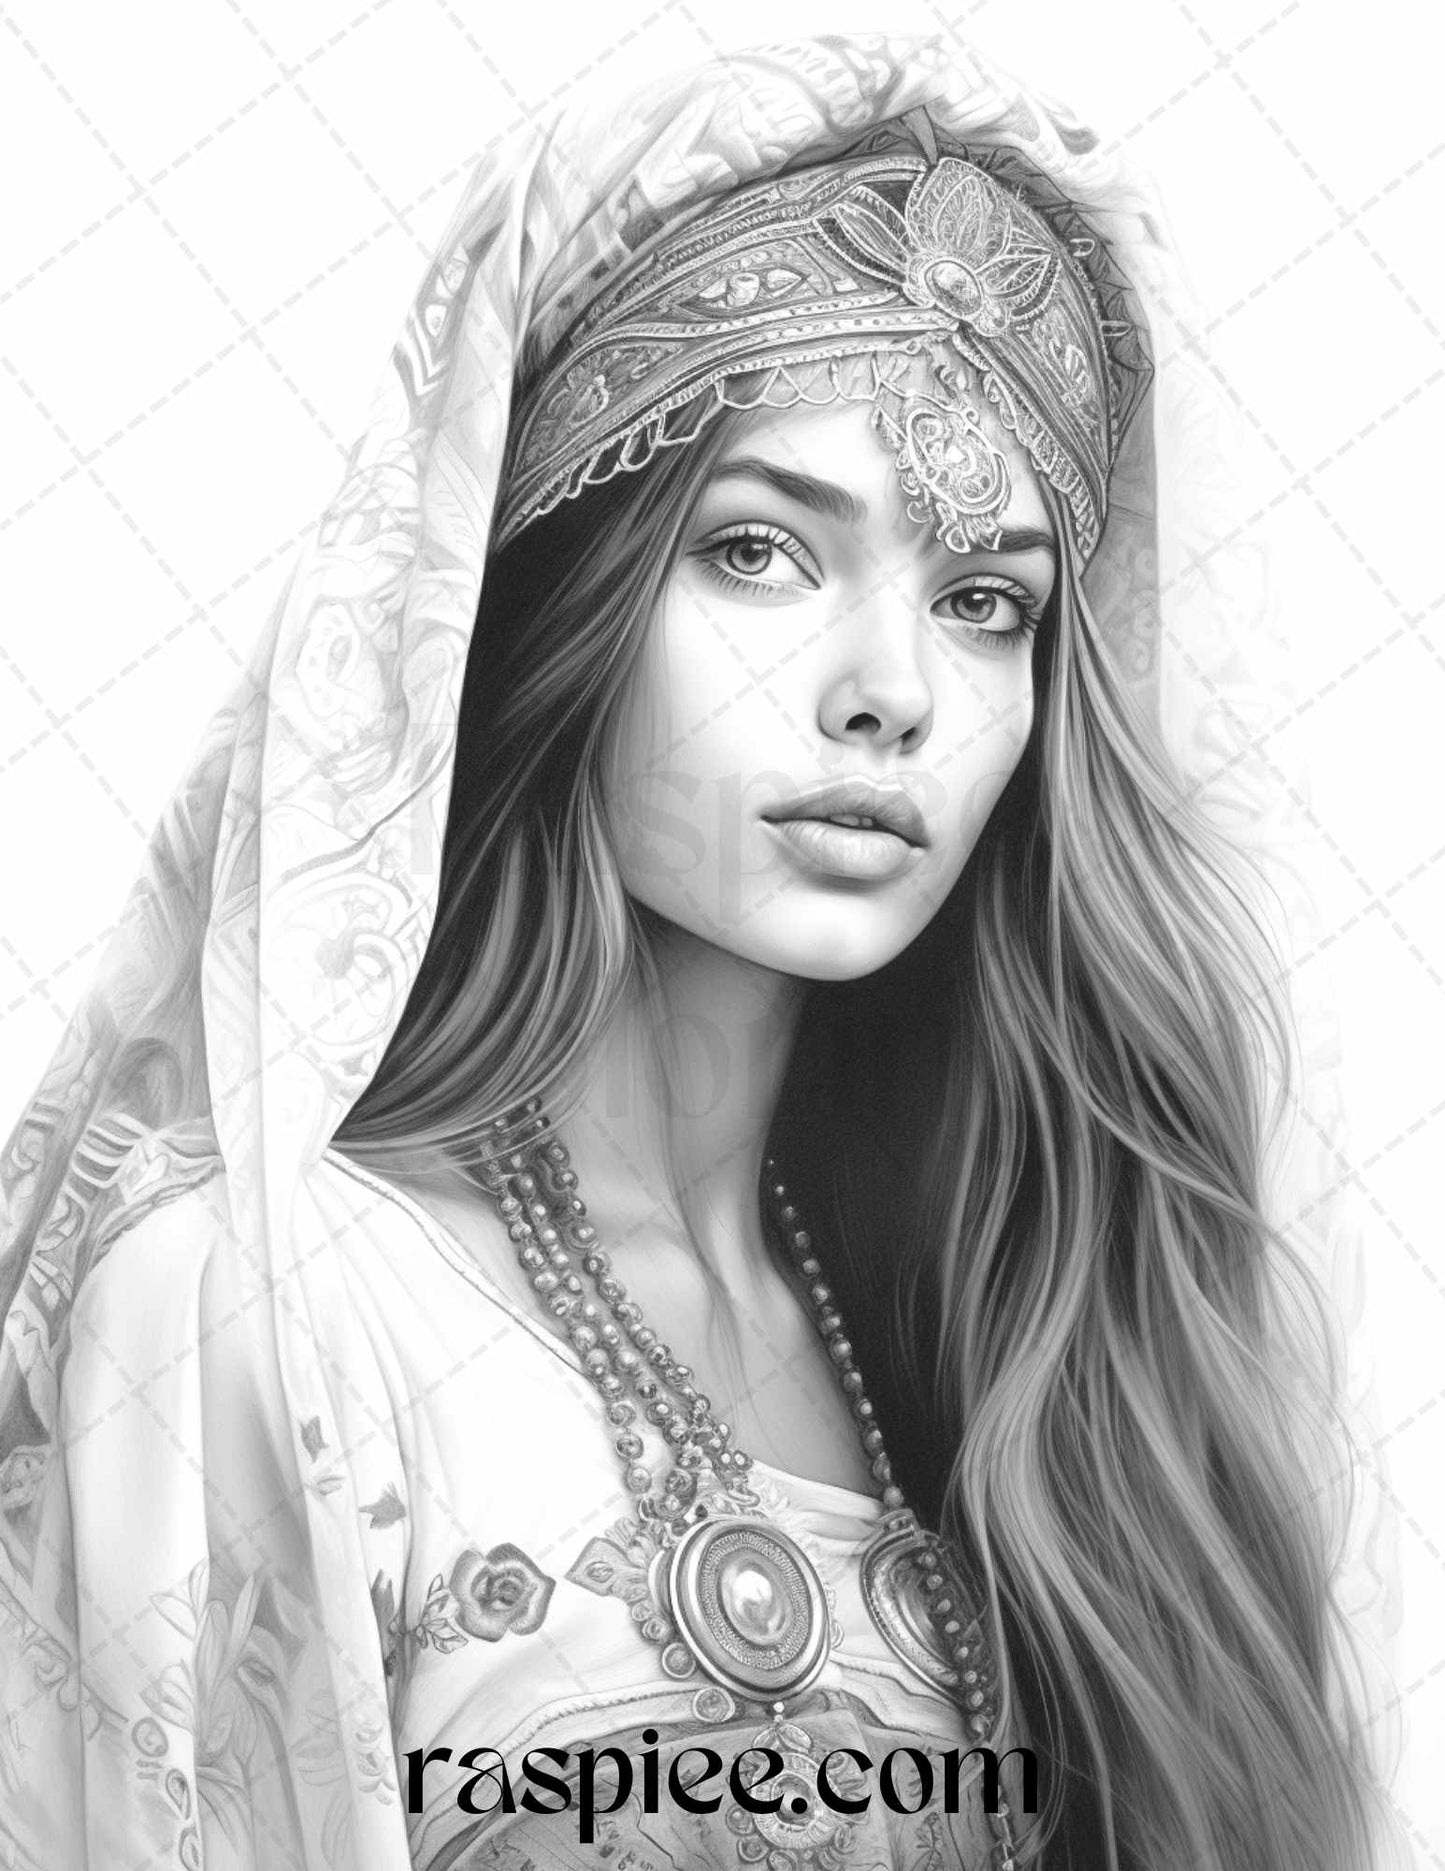 Gypsy Girls Grayscale Coloring Pages, Printable Adult Coloring Sheets, Artistic Stress Relief Coloring, Intricate DIY Coloring Pages, Portrait Coloring Pages for Adults